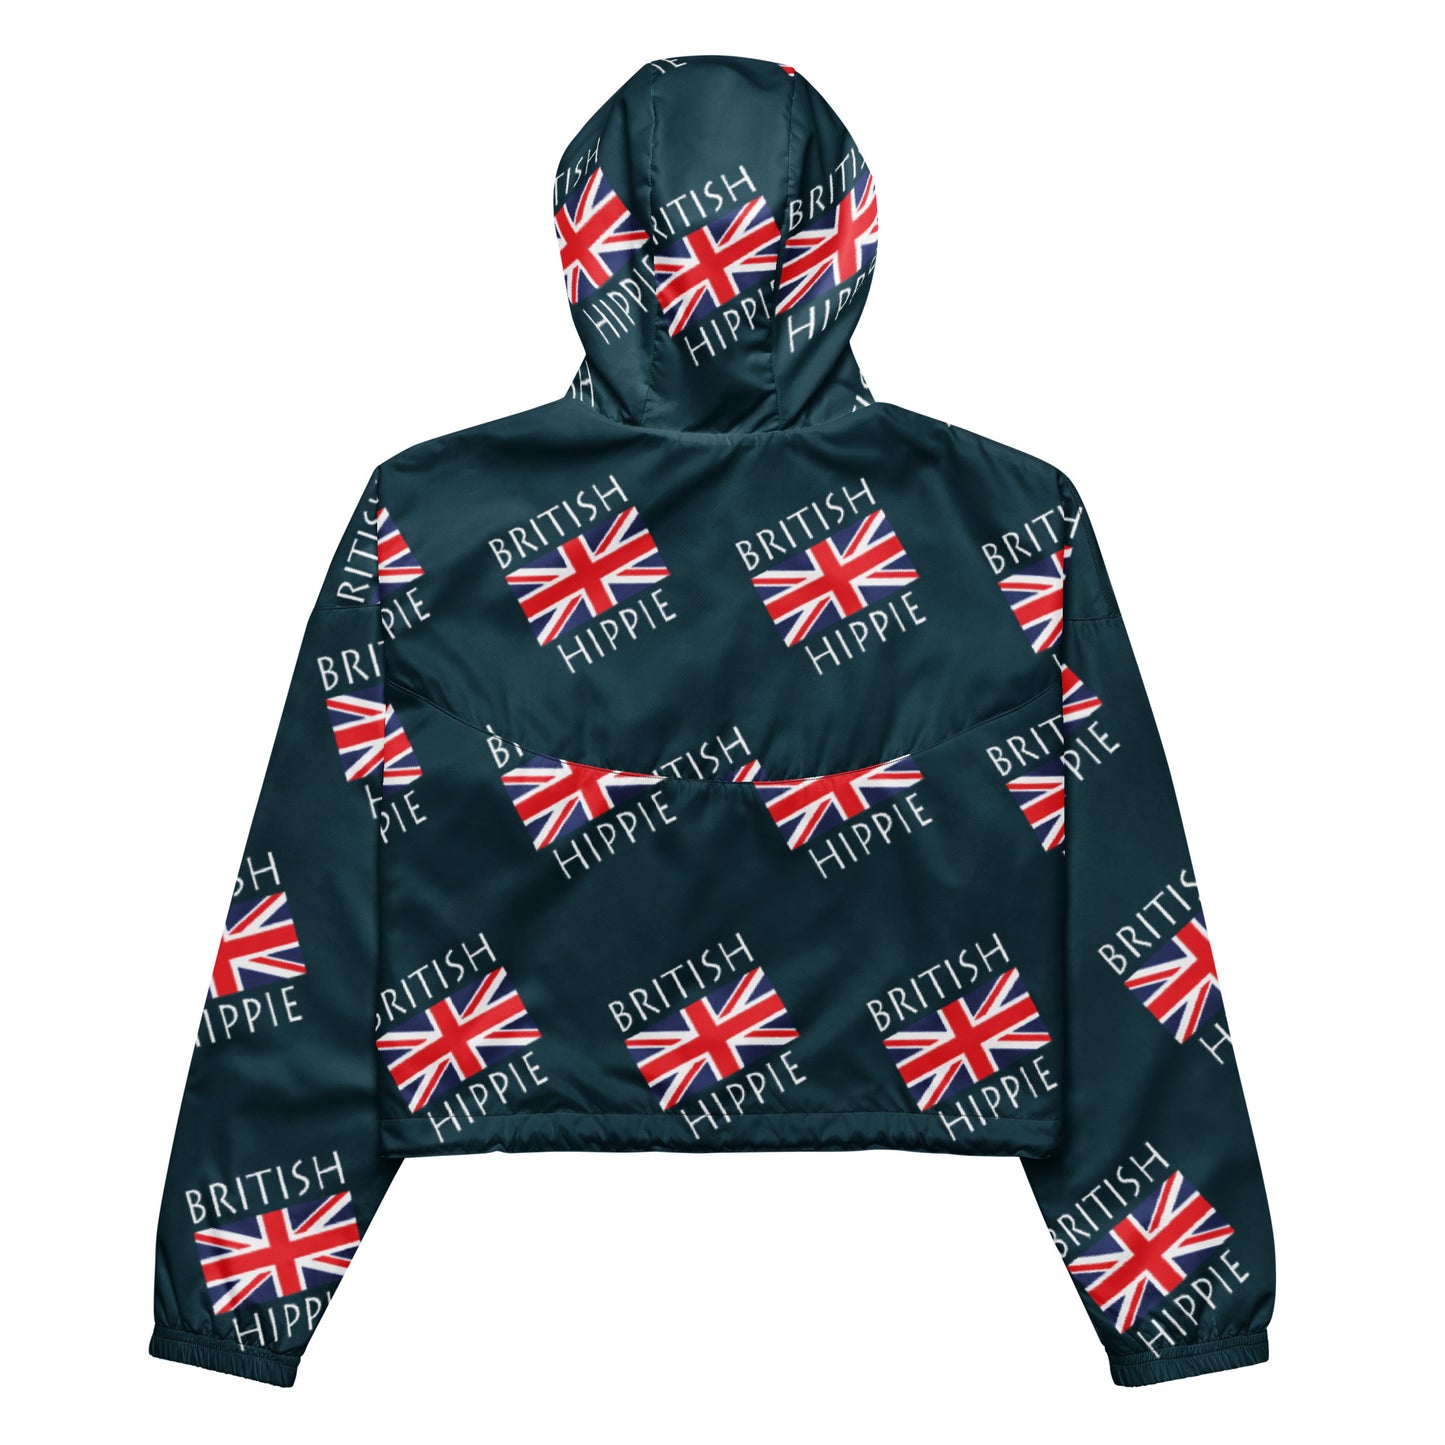 This British Flag Hippie™ stylish cropped half-zip windbreaker is a fashion statement! The repeating British Flag Hippie design is the coolest, hippest, trendiest piece in your wardrobe! Hike in style without the rain getting in the way...this cropped windbreaker is lightweight, waterproof, and suitable for every kind of adventure. Features include side-slit pockets, breathable mesh lining, and adjustable drawstrings on the hood and waist to support all your stylish outdoor looks.